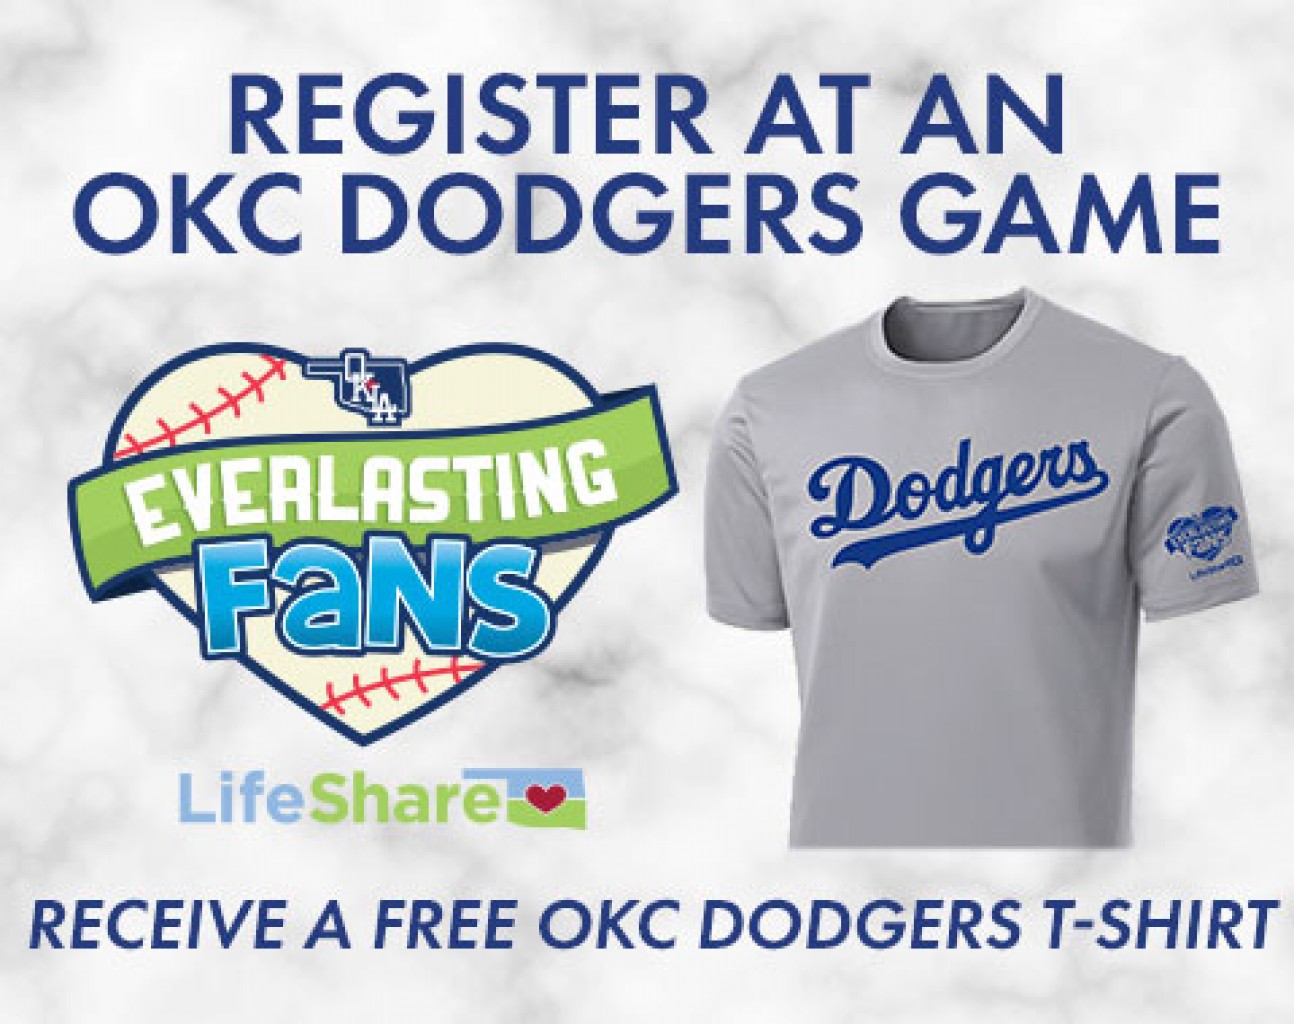 OKC DODGERS PARTNER WITH LIFESHARE TO ENCOURAGE ORGAN DONATION